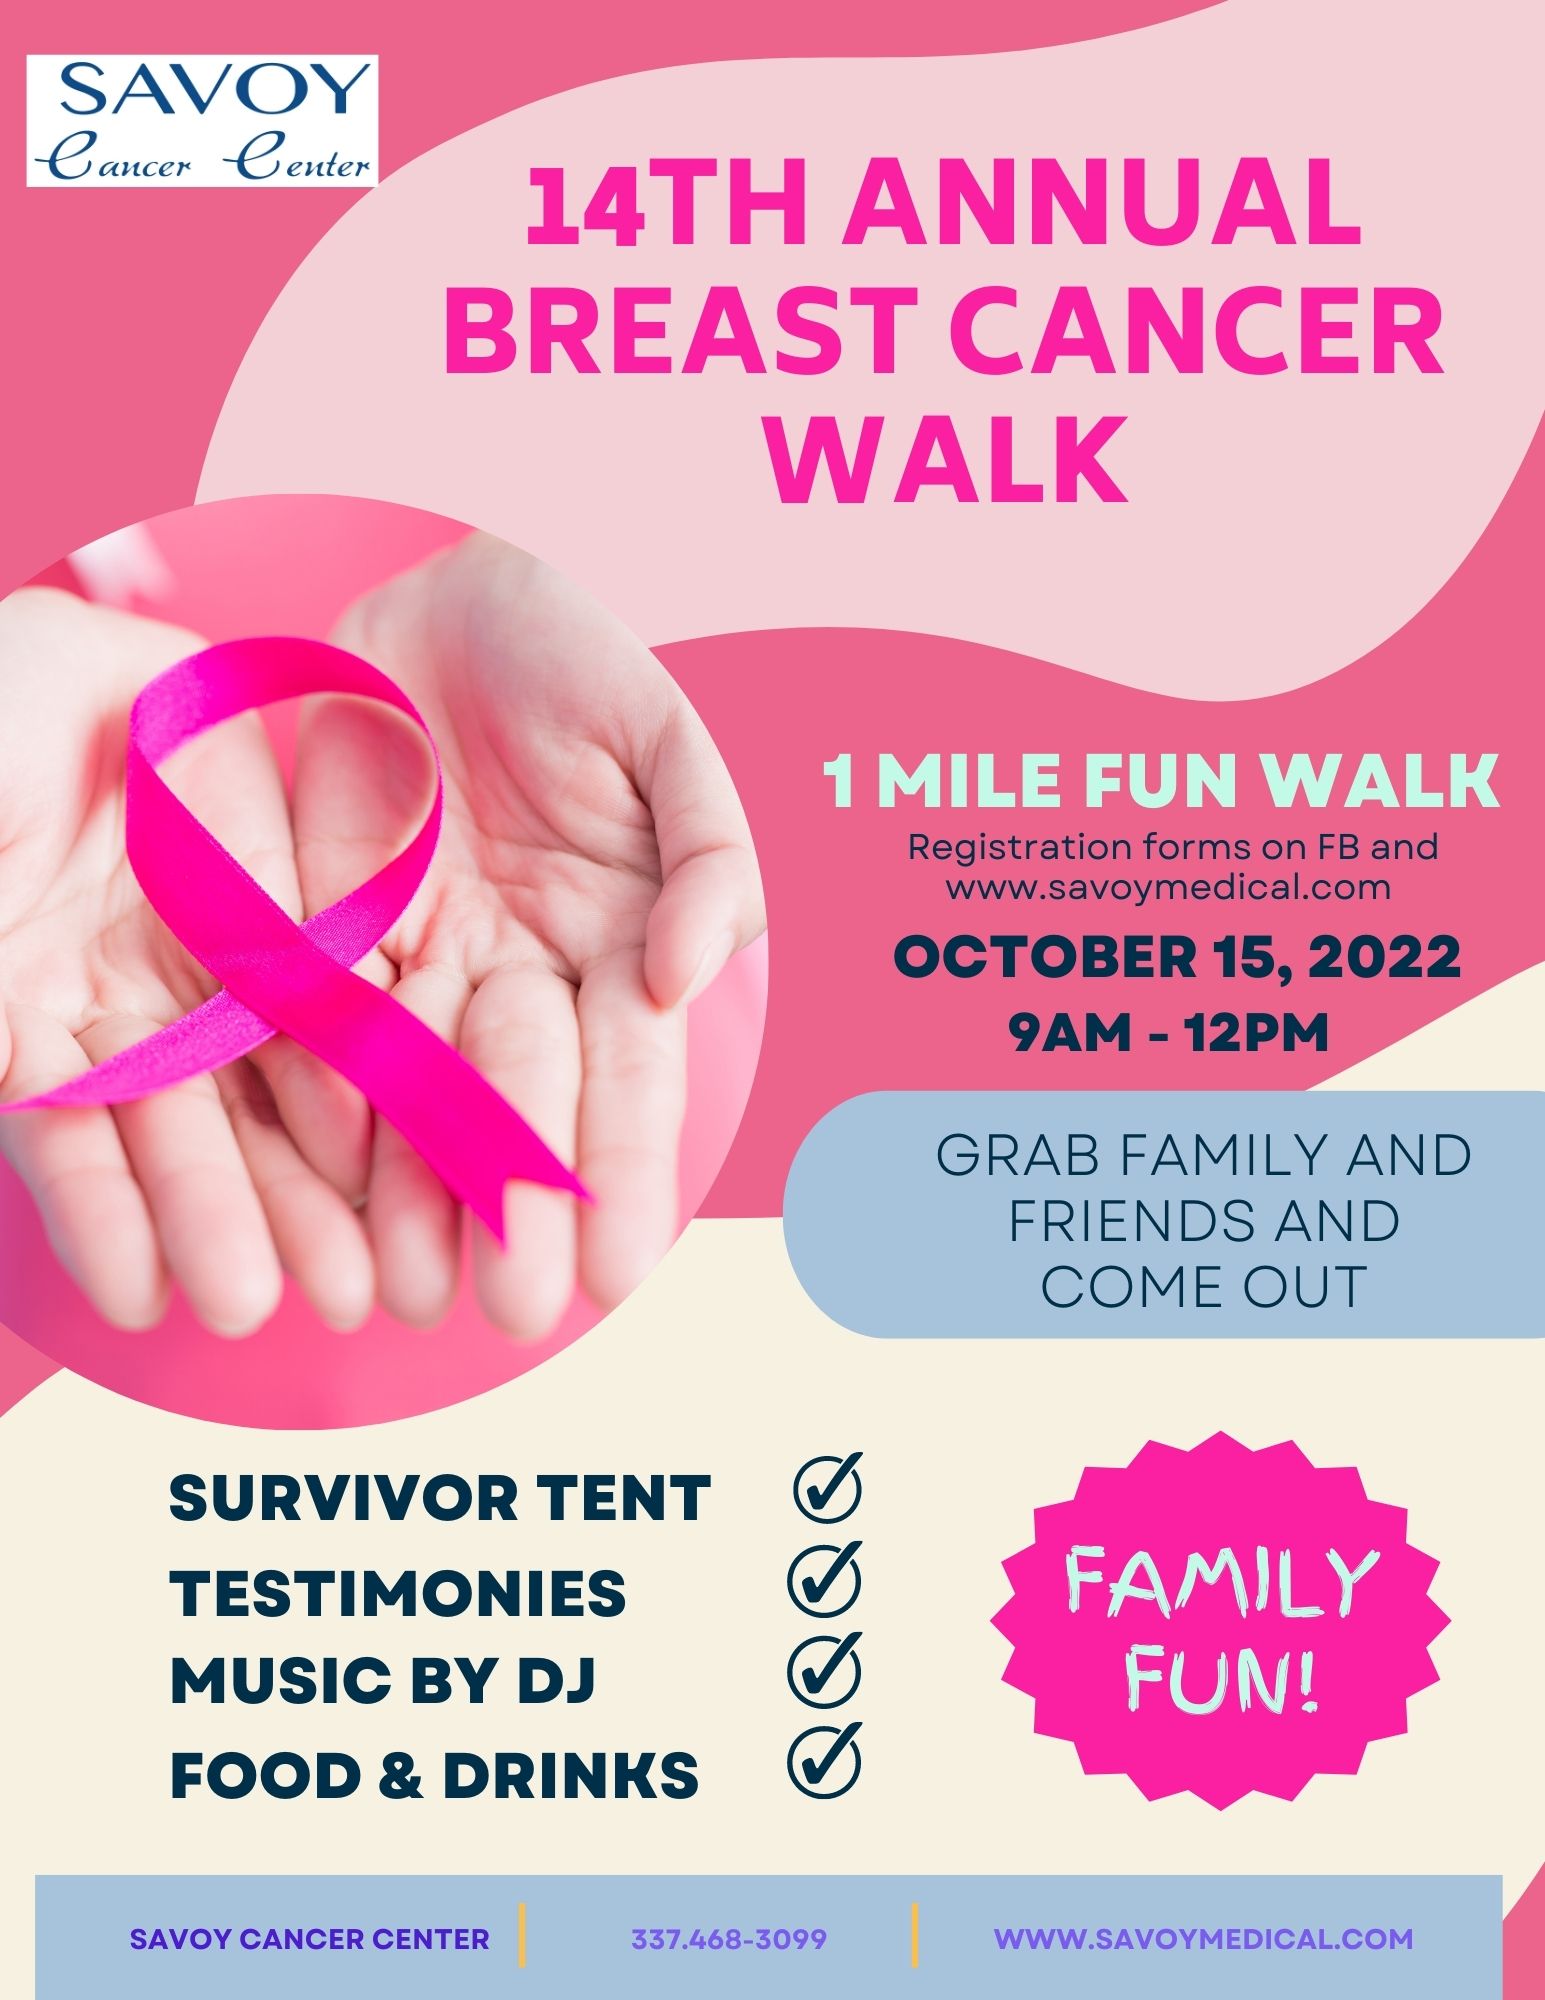 Featured image for “14th Annual Savoy Cancer Center Breast Cancer Awareness Walk”